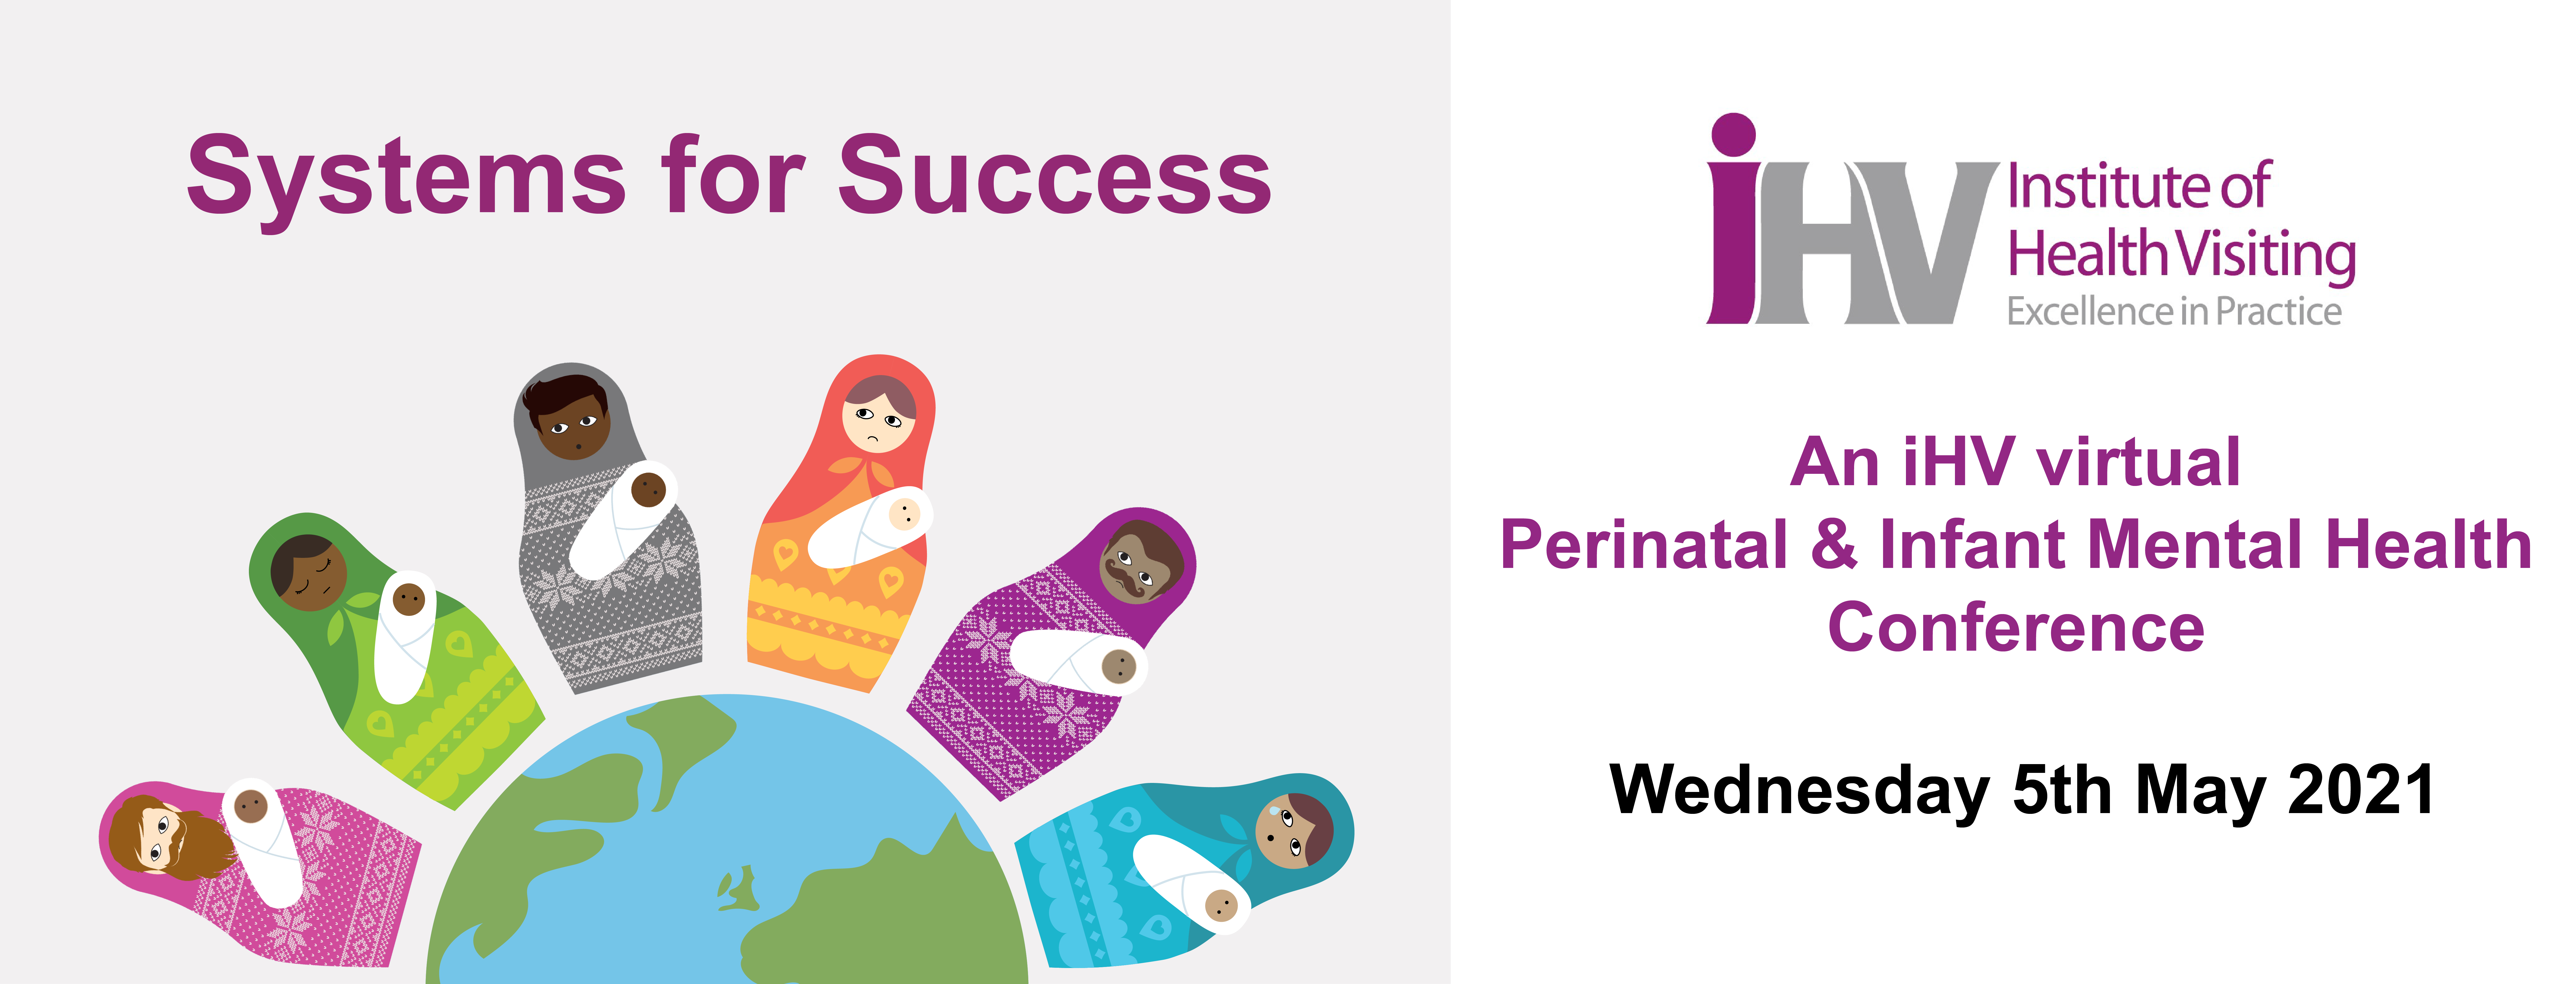 iHV Perinatal and Infant Mental Health Conference: Systems for Success